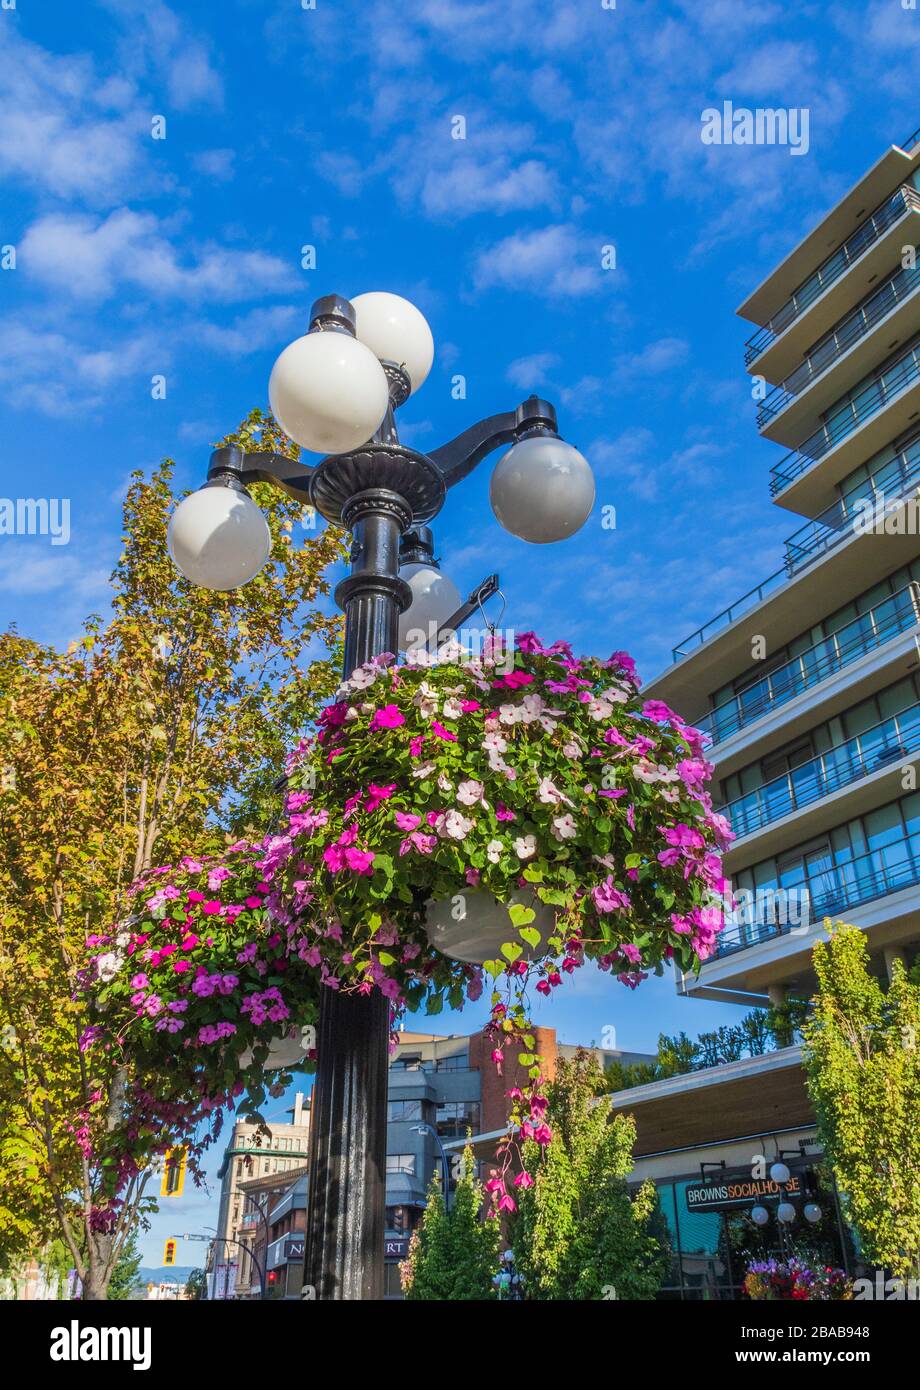 Flowers on city street lamps in downtown Victoria, British Columbia, Canada. Stock Photo